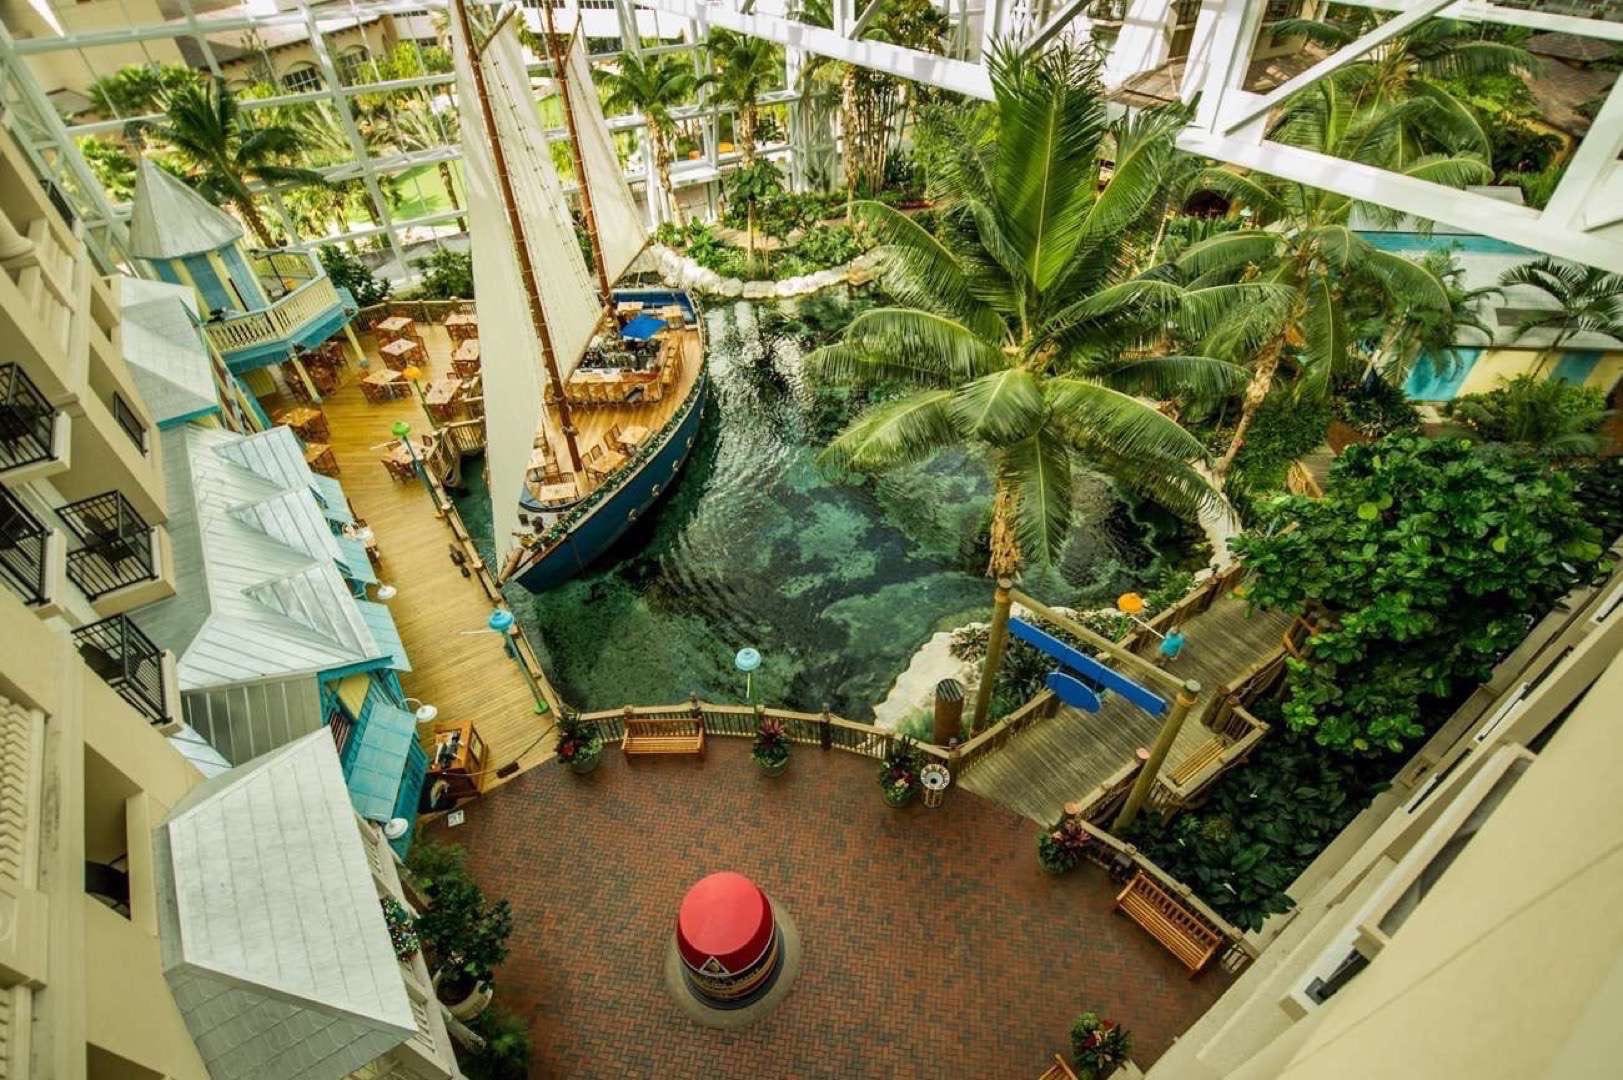 IU C&I Studios Portfolio and Page Gaylord Palms Resort and Convention Center Overhead view of Interior showing a marine themed area with a small ship, walkways, marker, palm trees and trees.